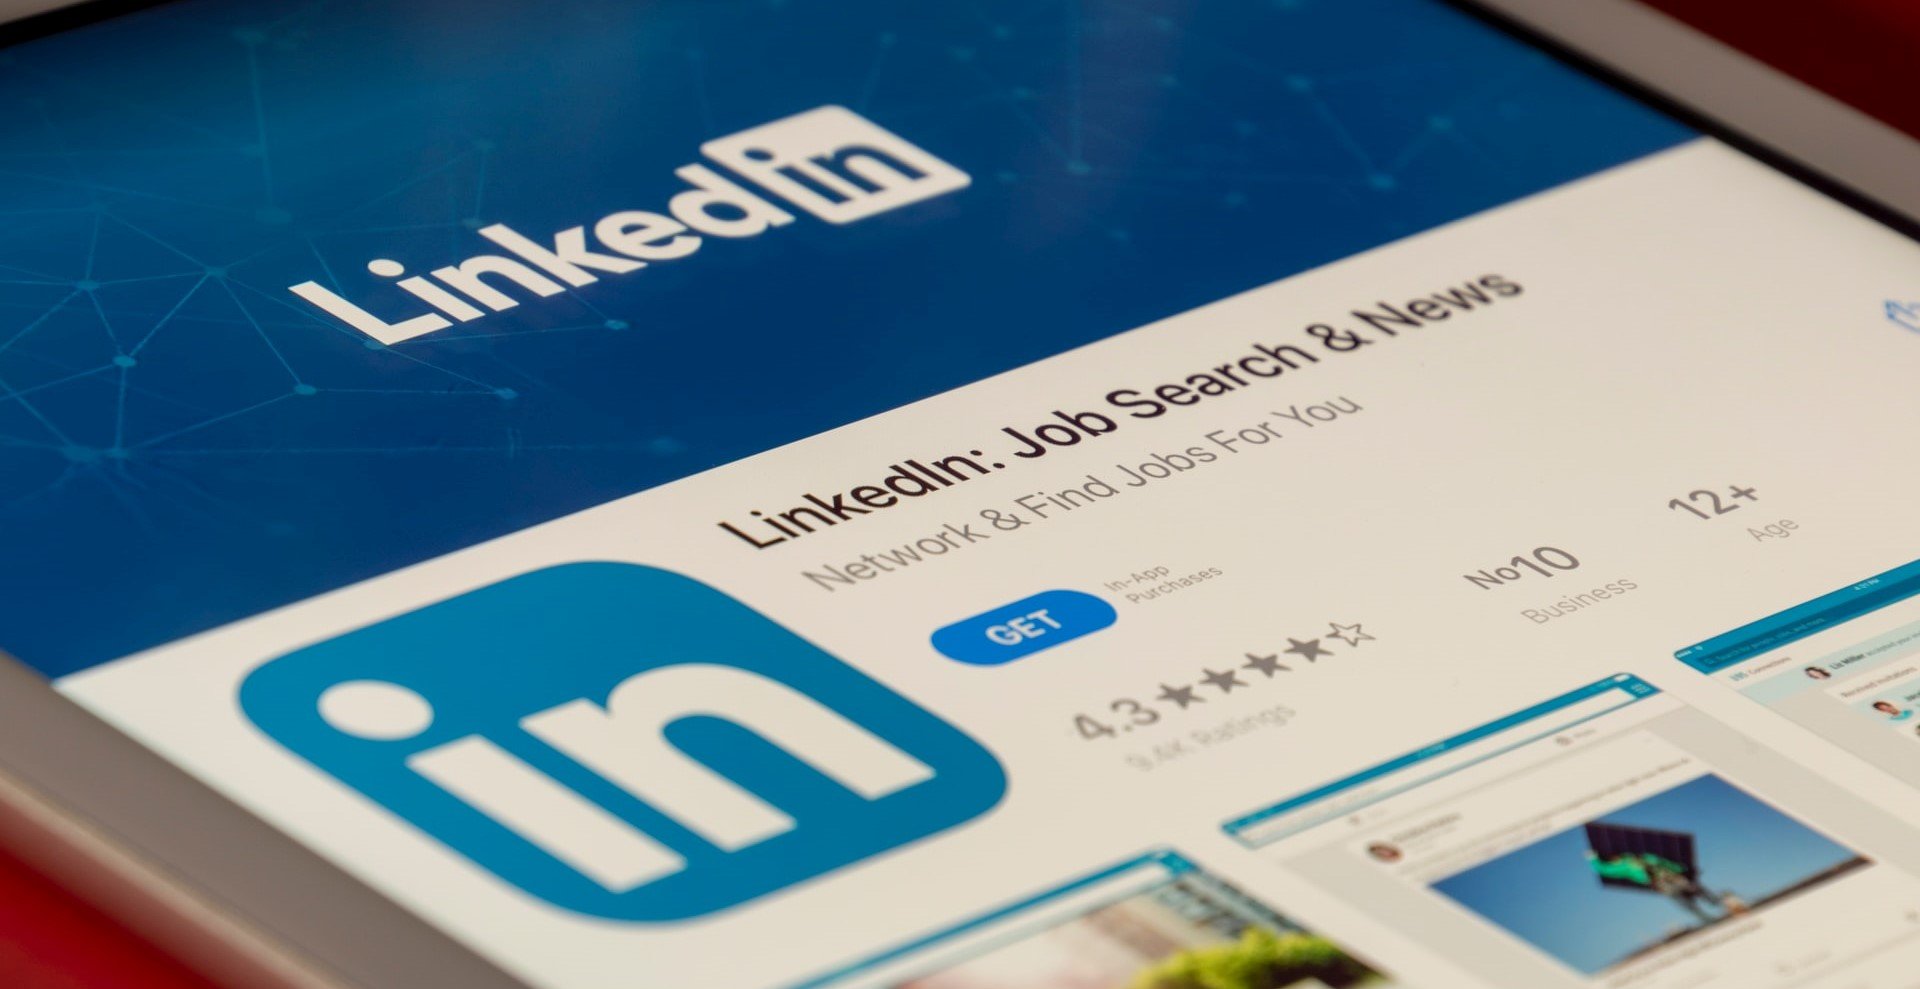 7 LinkedIn Tips For Healthcare Professionals